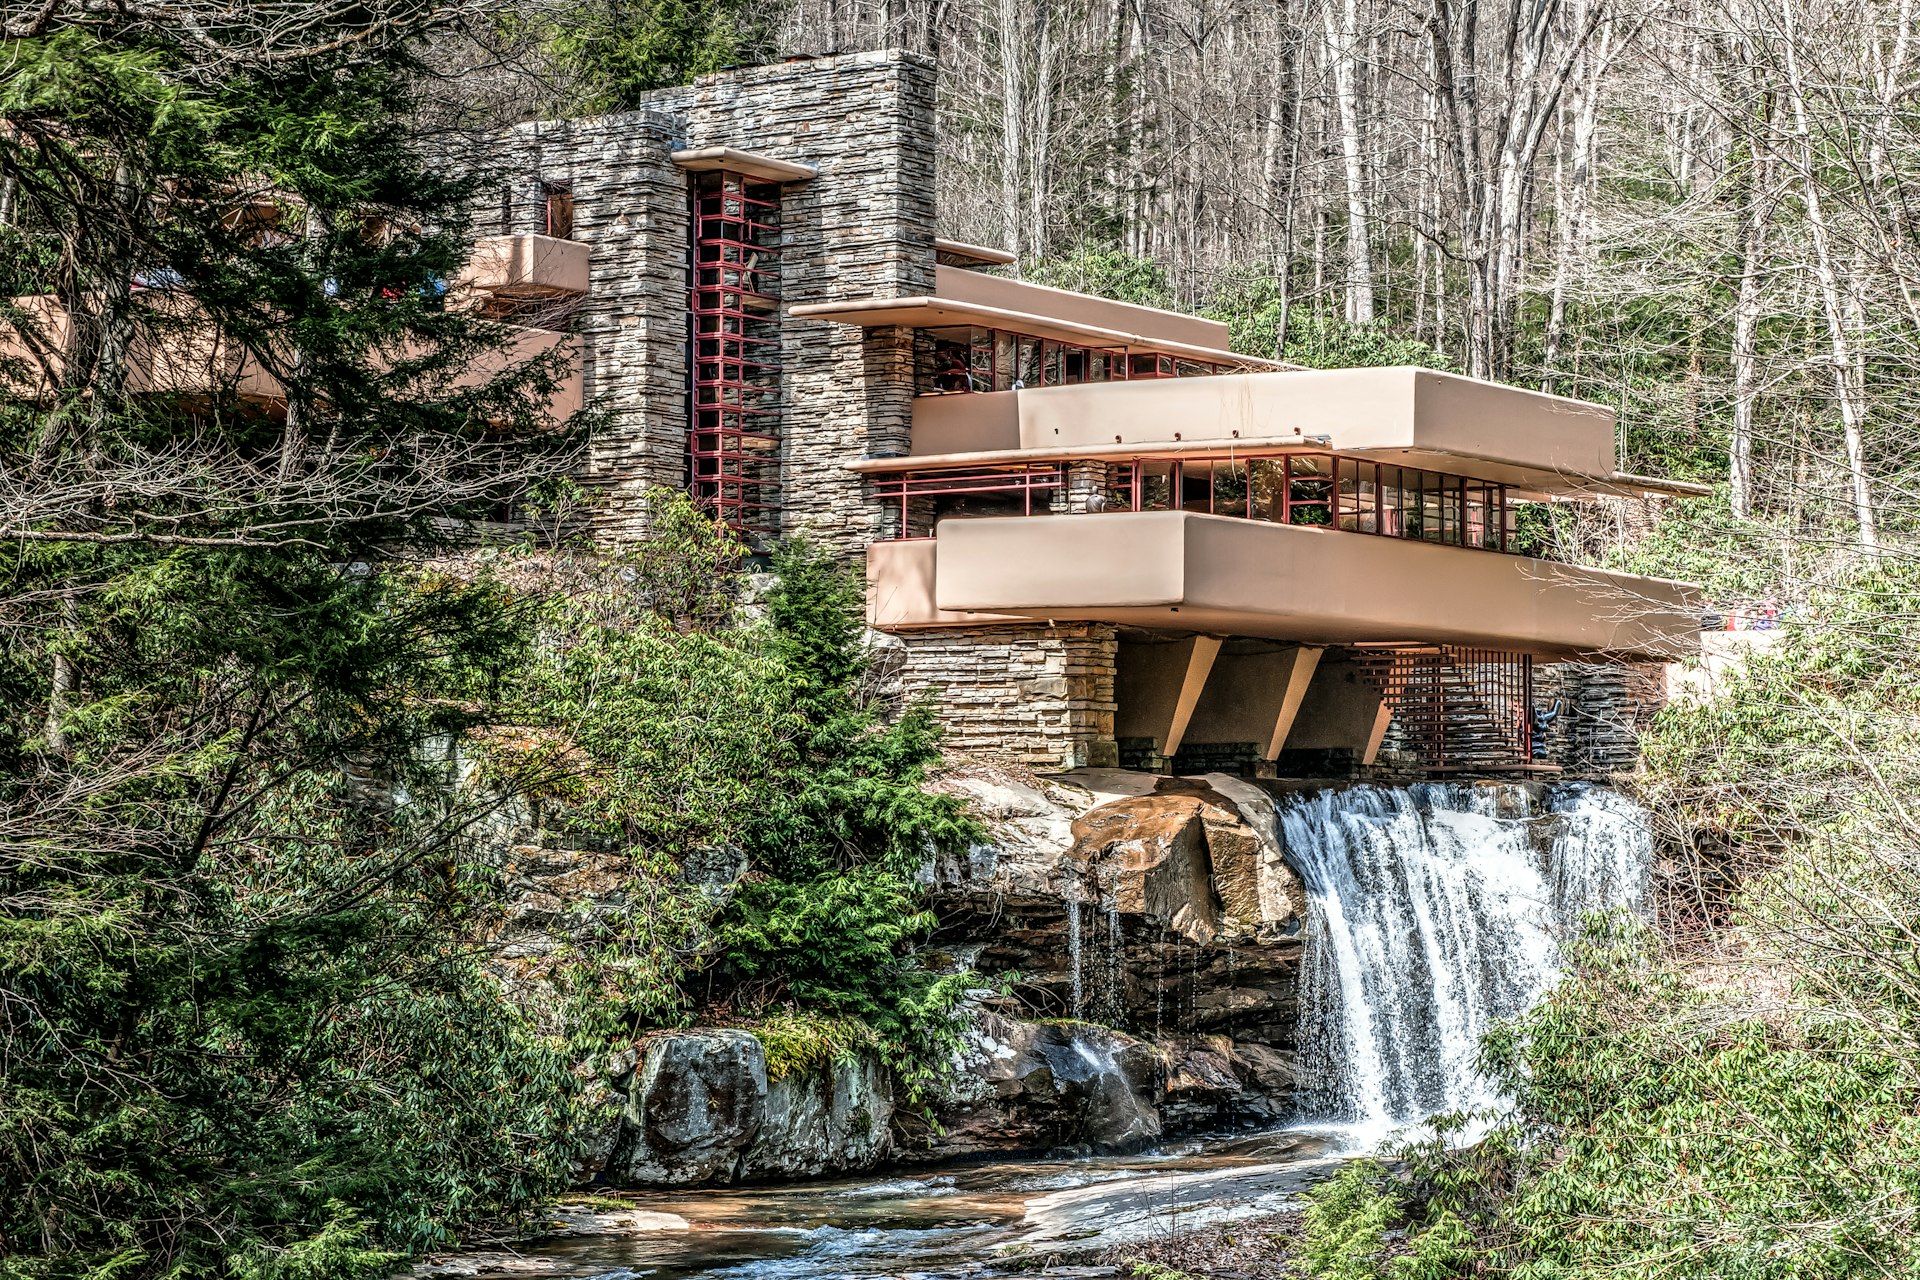 One of Frank Lloyd Wright's most famous works, Fallingwater was designed in 1935 and completed in 1937. It's remarkable in that it seems to hover over a 30-foot waterfall